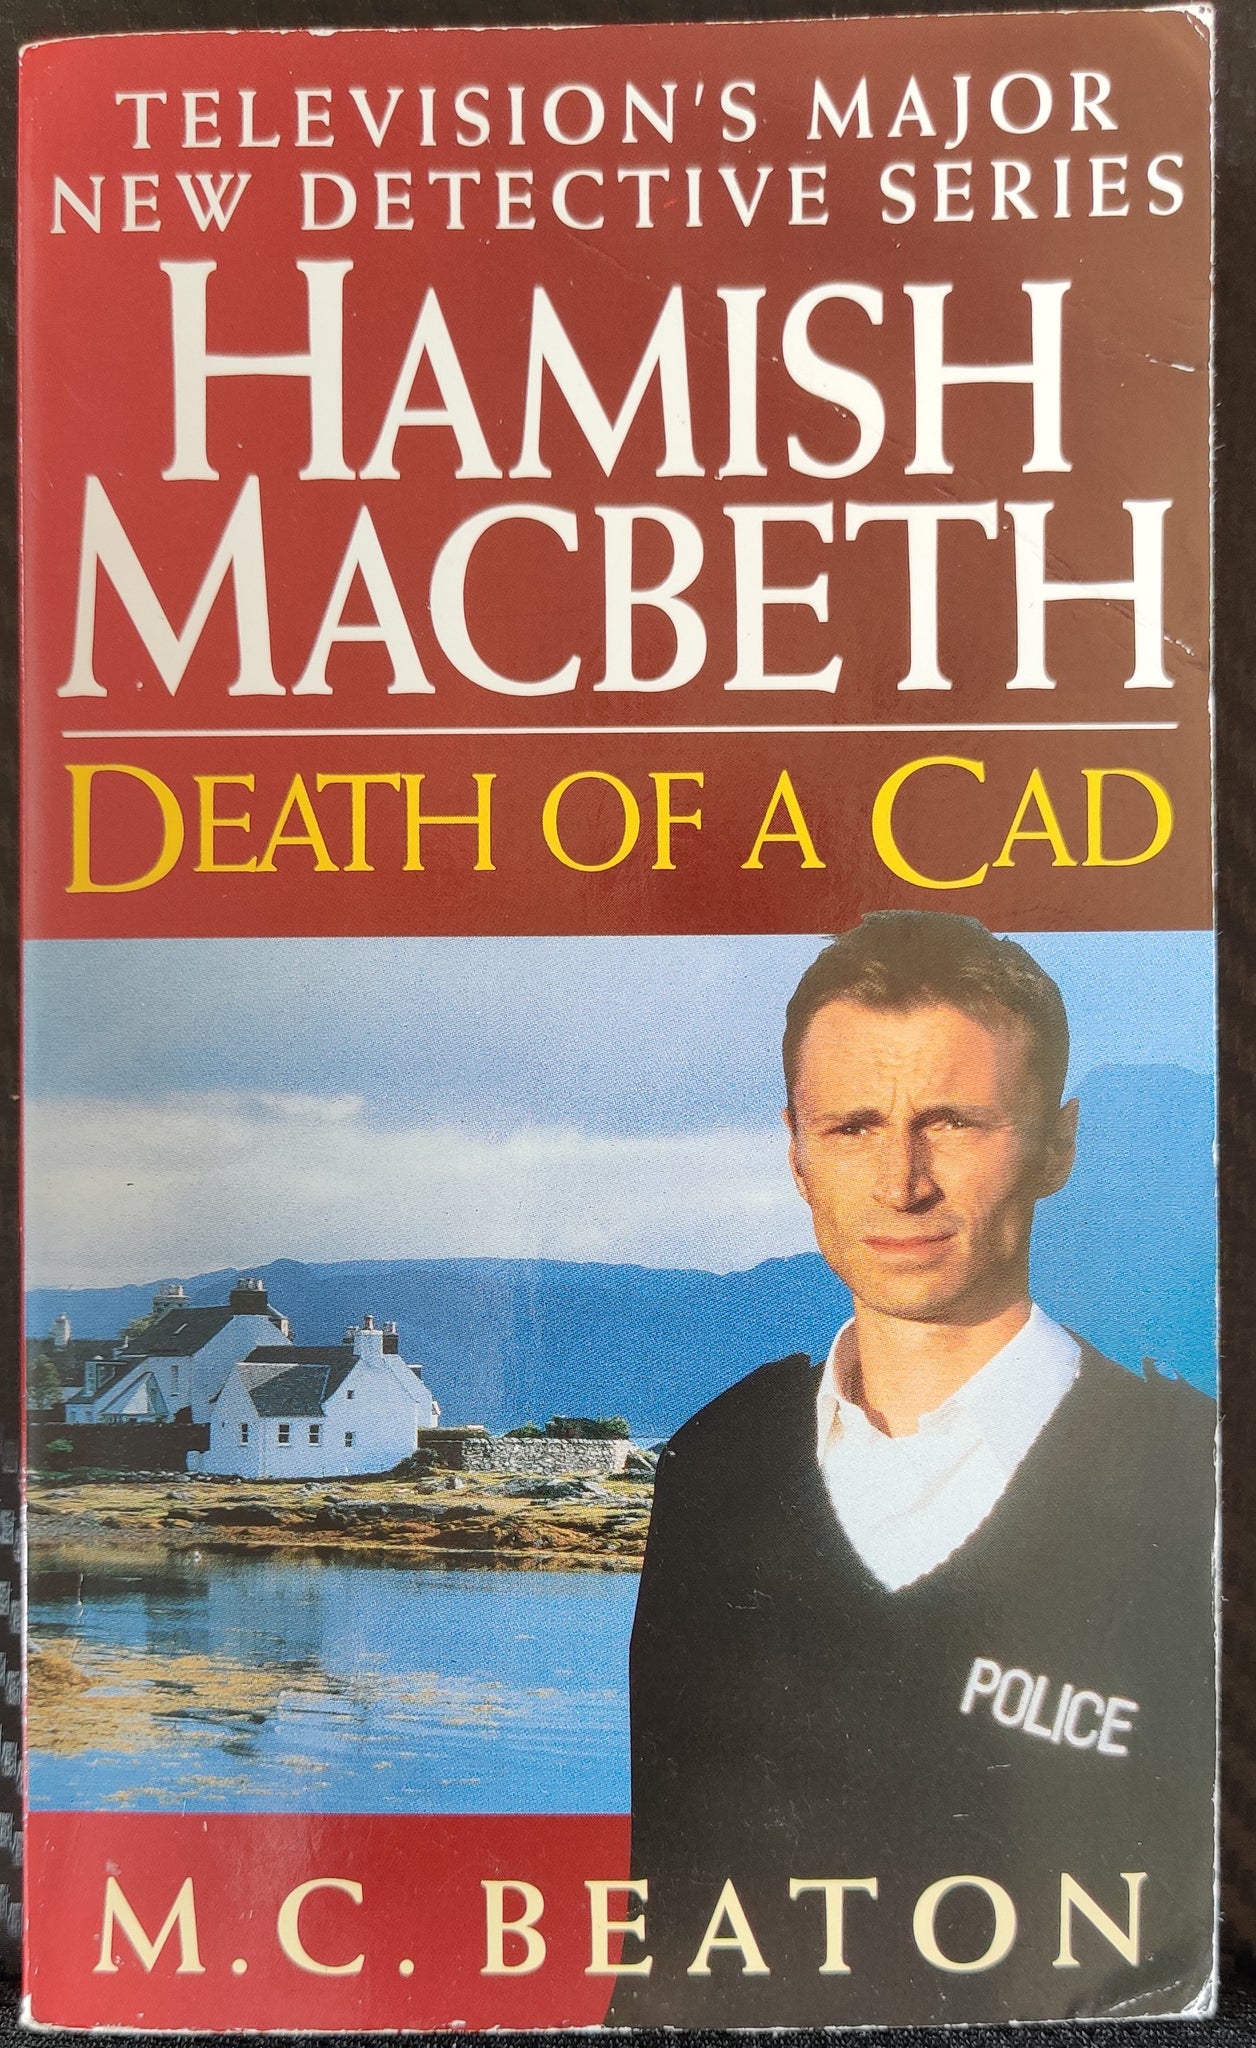 Death of a Cad by M. C. Beaton